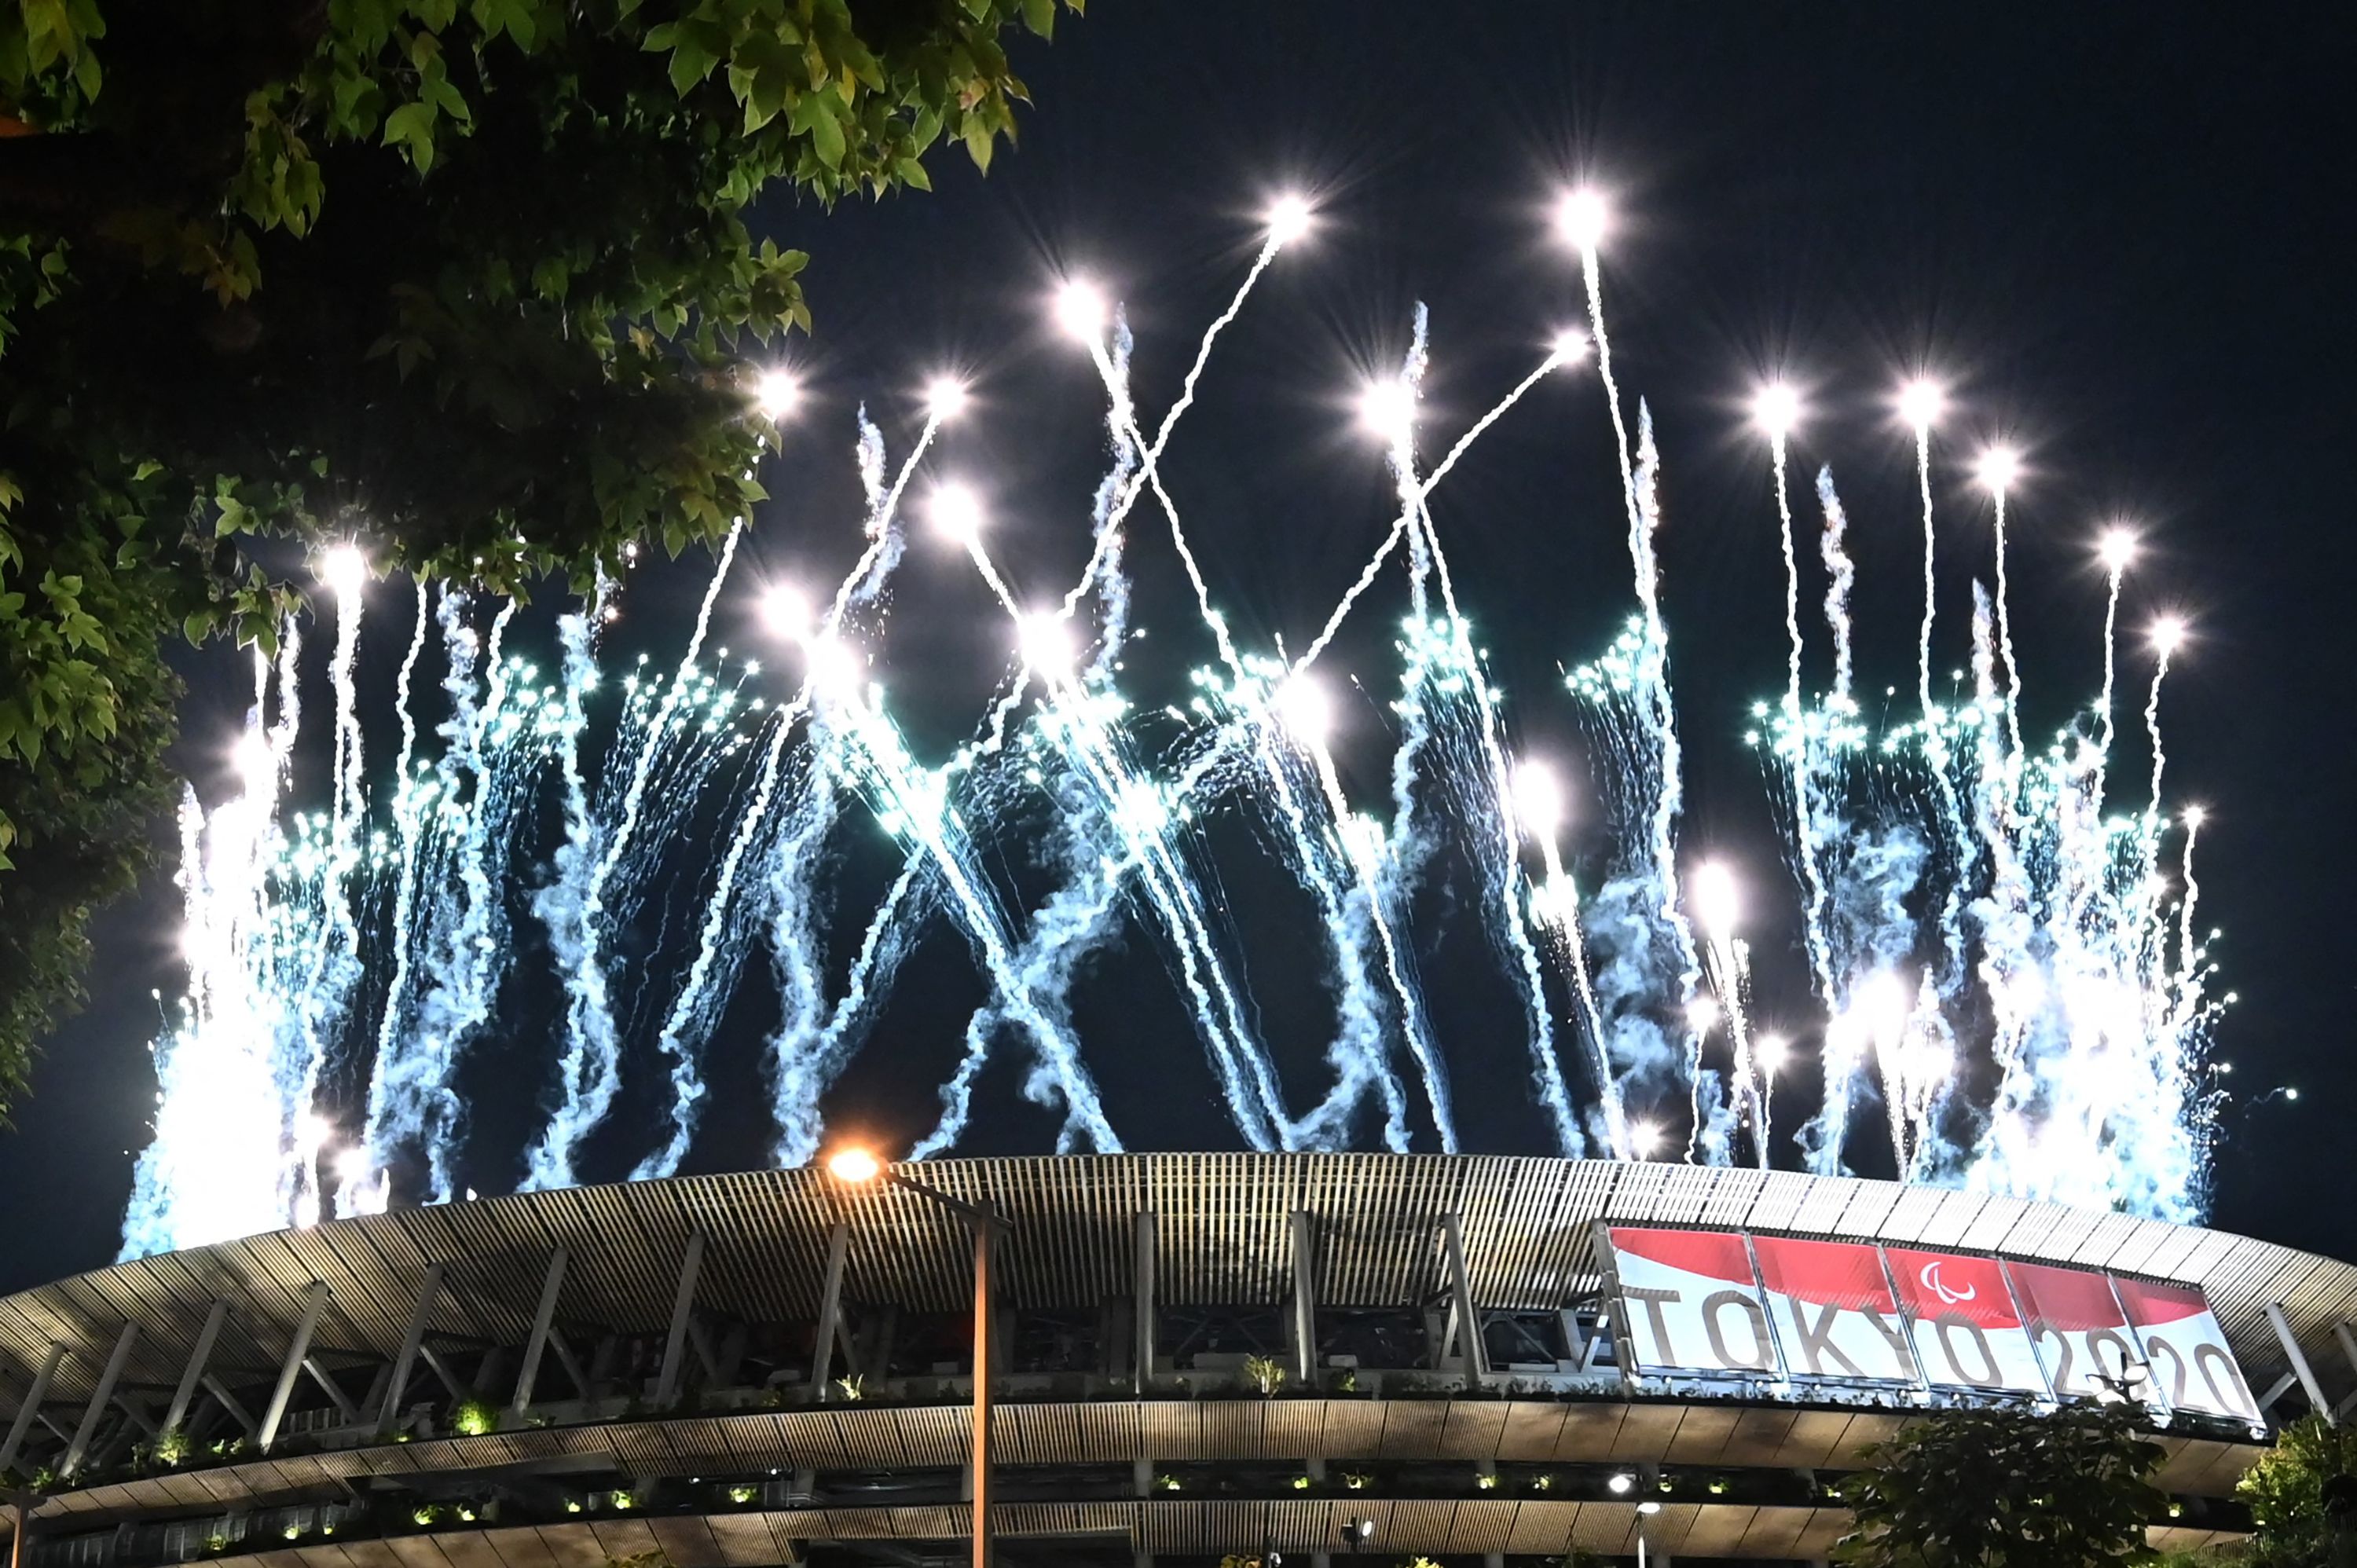 Fireworks light up the sky above the Olympic Stadium during the opening ceremony for the Tokyo 2020 Paralympic Games in Tokyo on August 24, 2021.